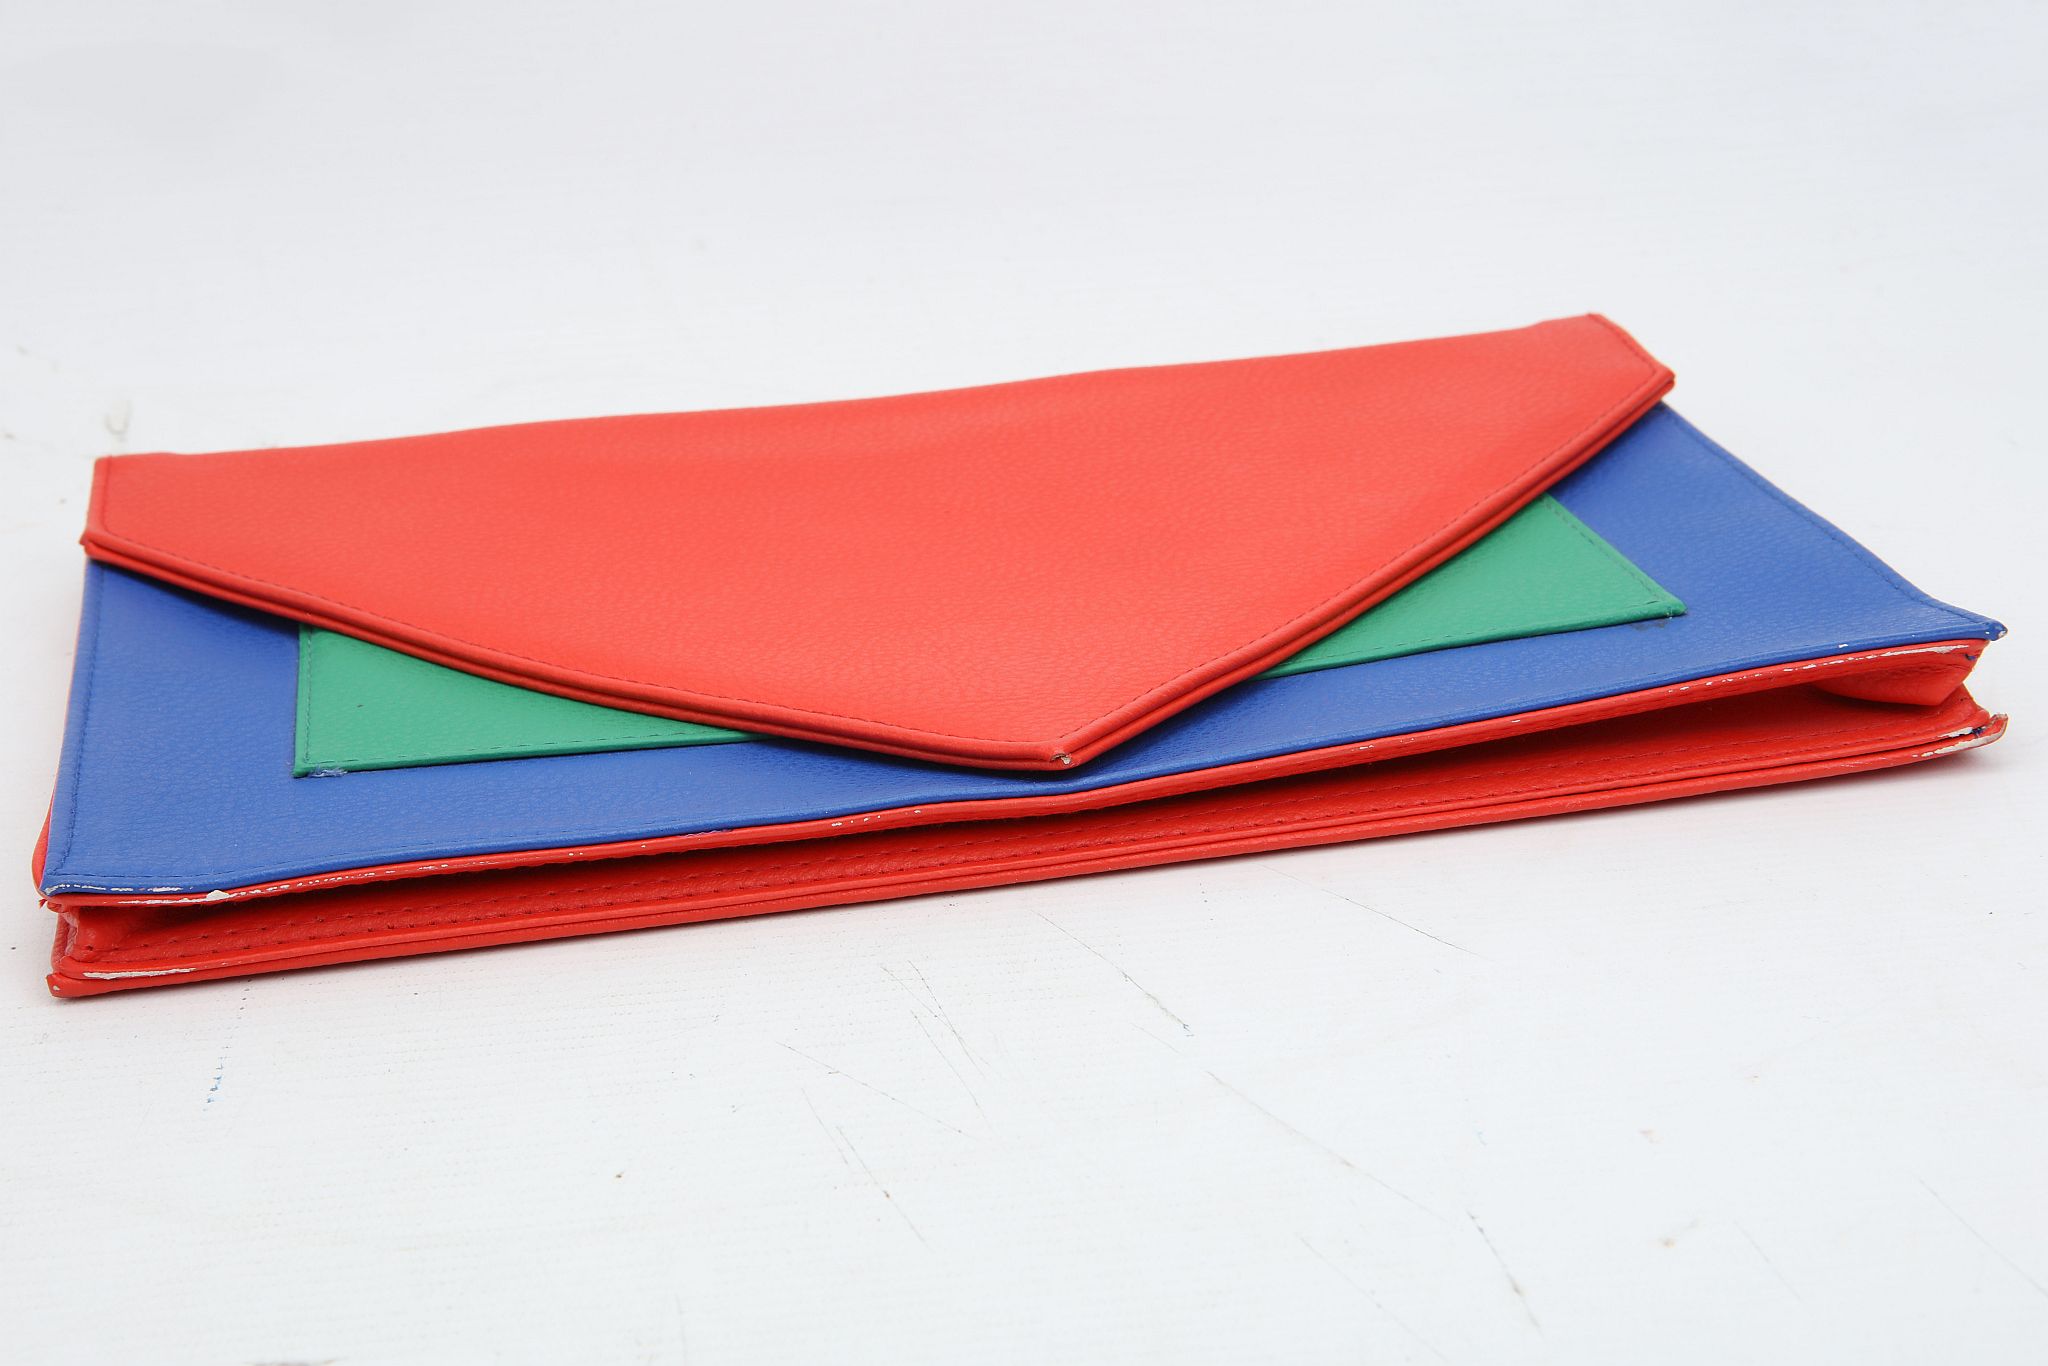 TWO 1980s CLUTCH BAGS, one red Louis Feraud example, the other Ivorie de Balmain multicoloured - Image 6 of 10